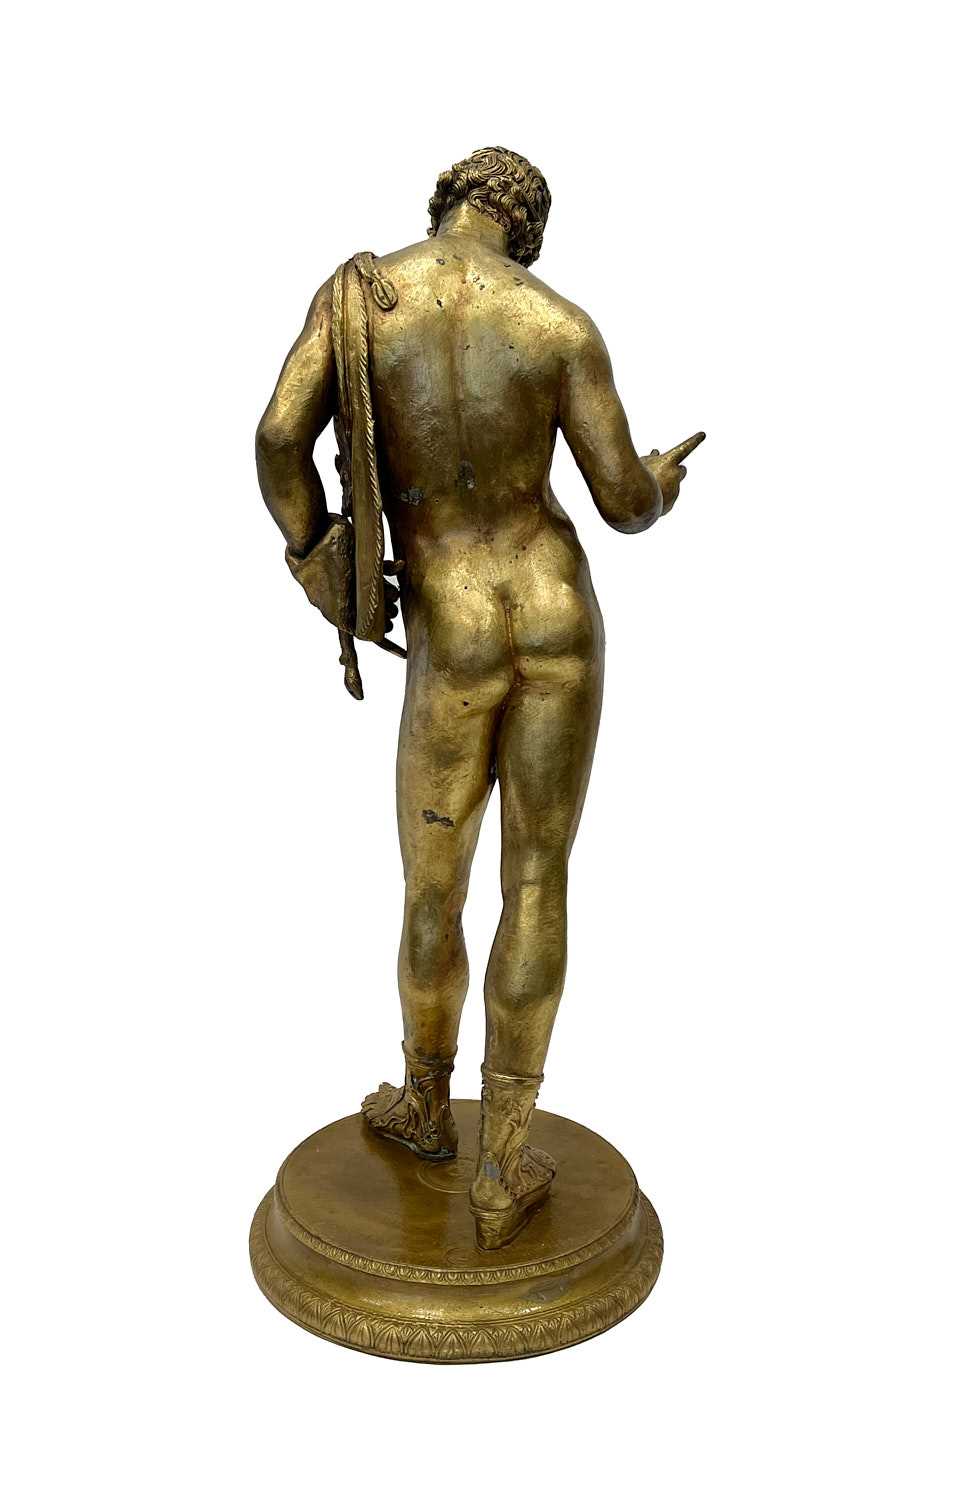 A 19TH CENTURY GRAND TOUR GILT BRONZE FIGURE OF NARCISSUS, AFTER THE ANTIQUE - Image 2 of 7